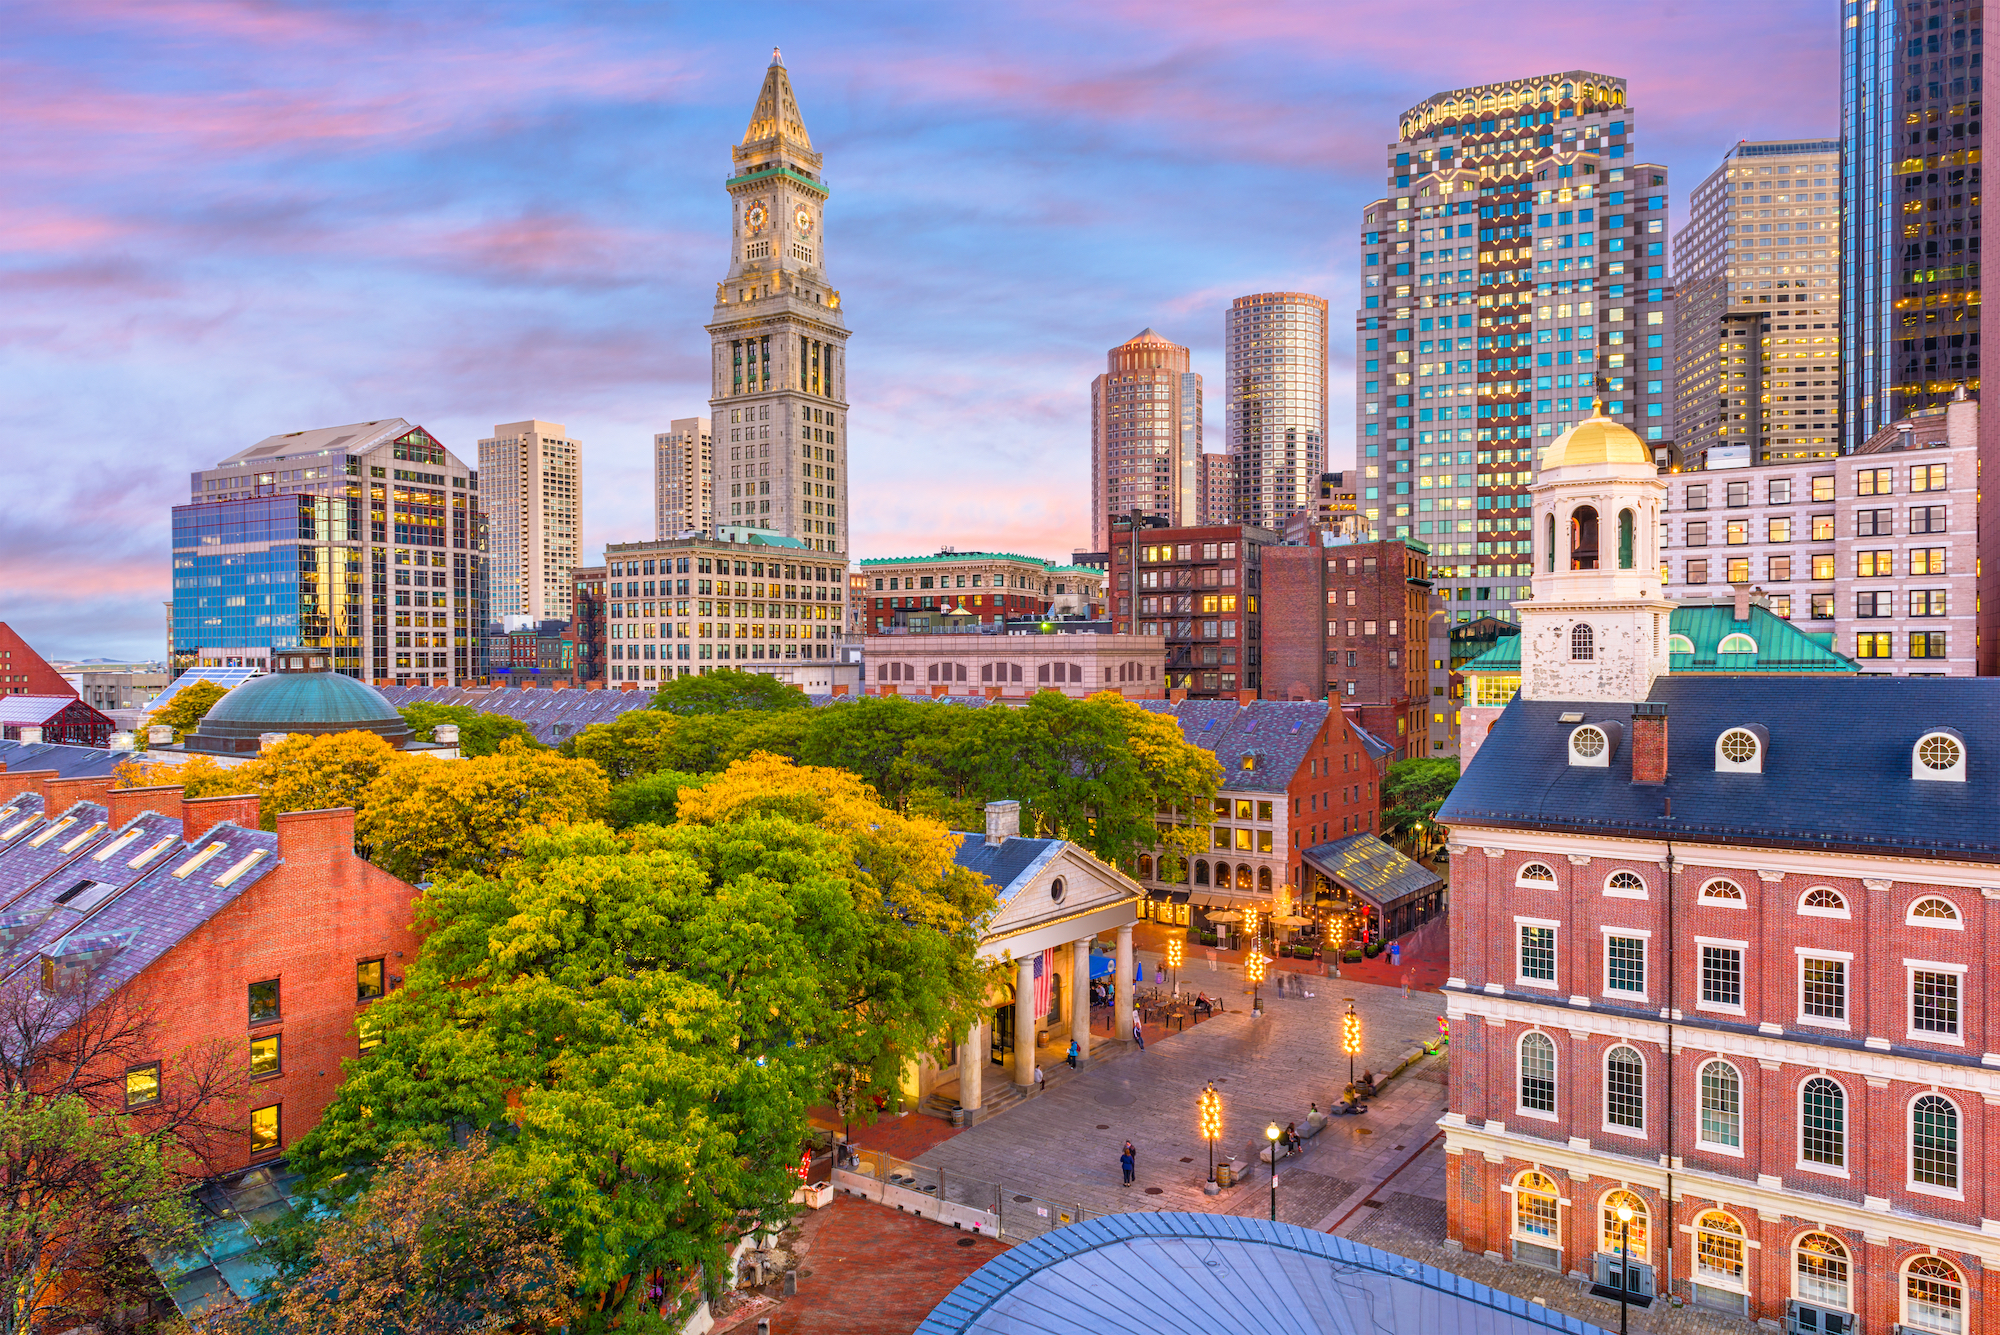 A photo of Boston in the evening.